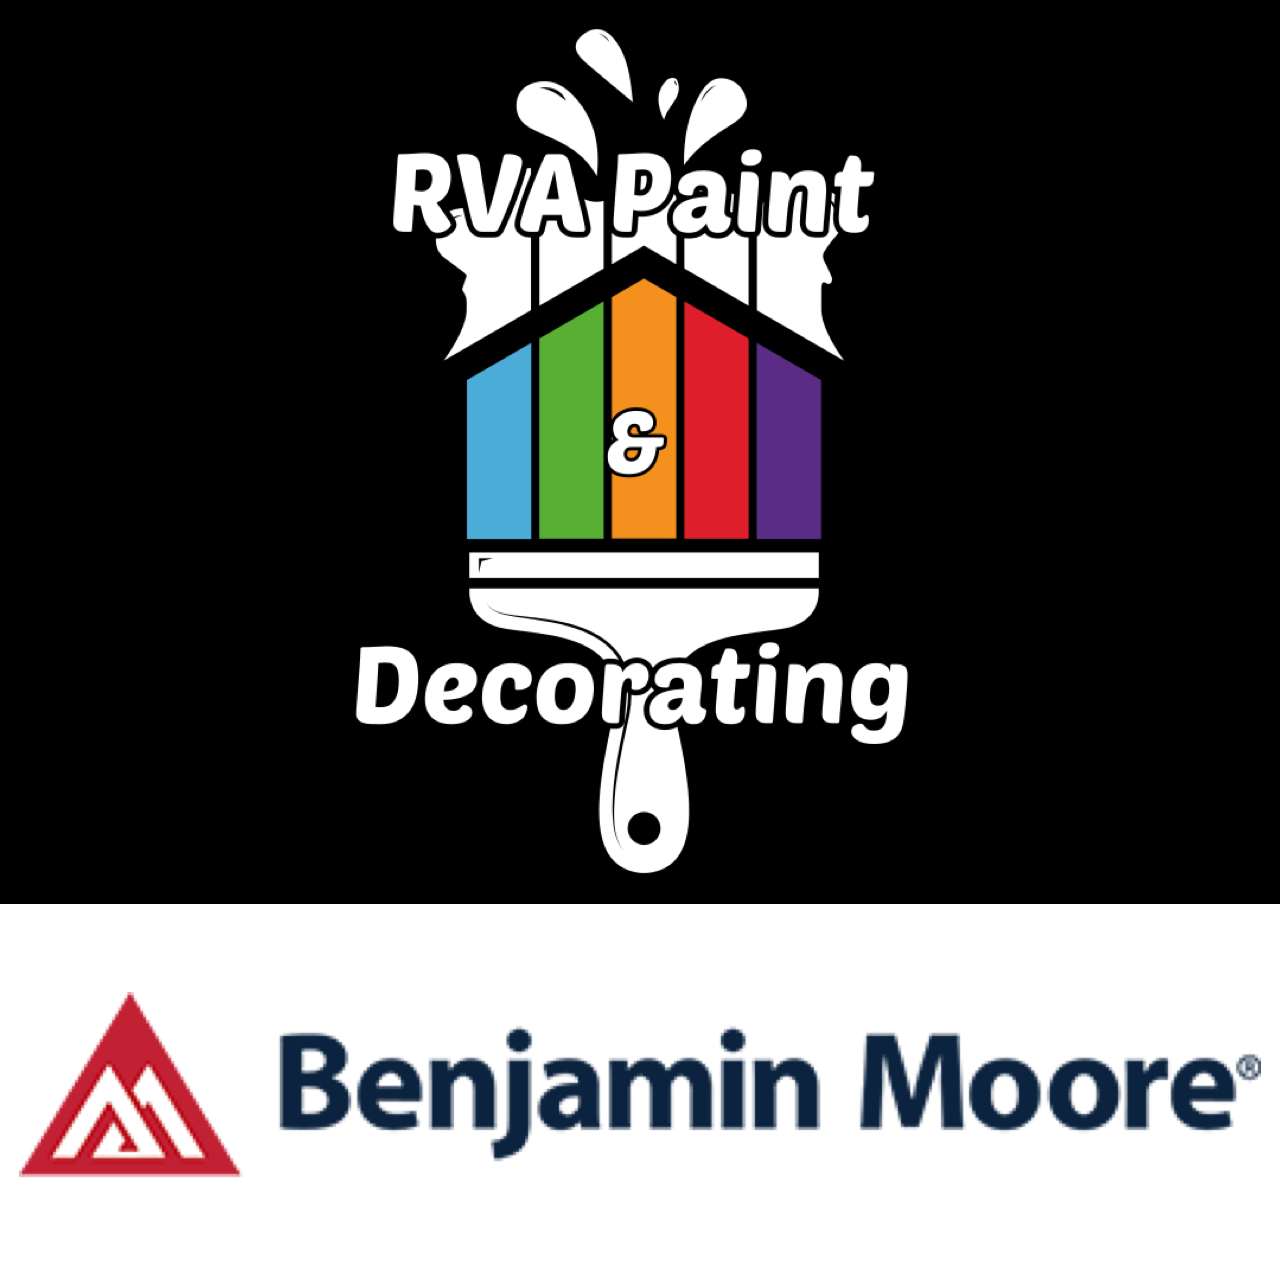 Shop Online with RVA Paint & Decorating, a Benjamin Moore Paint Store in Ashland